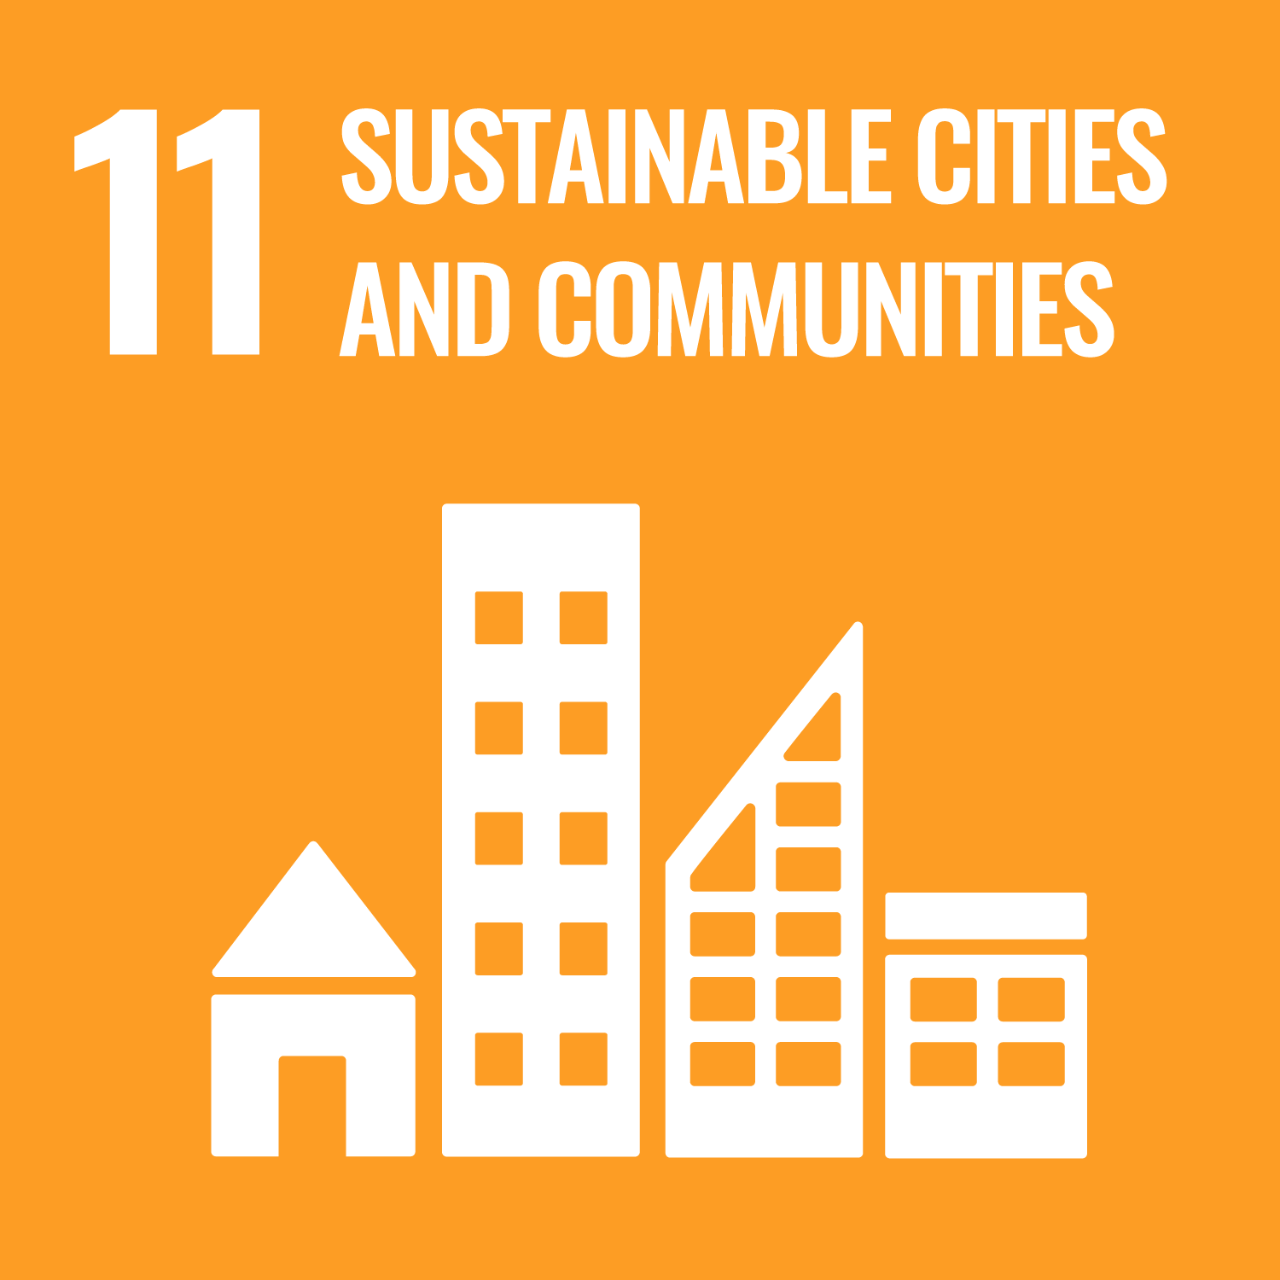 Orange icon with graphic of buildings to represent UNSDG Goal 11: Sustainable Cities and Communities.